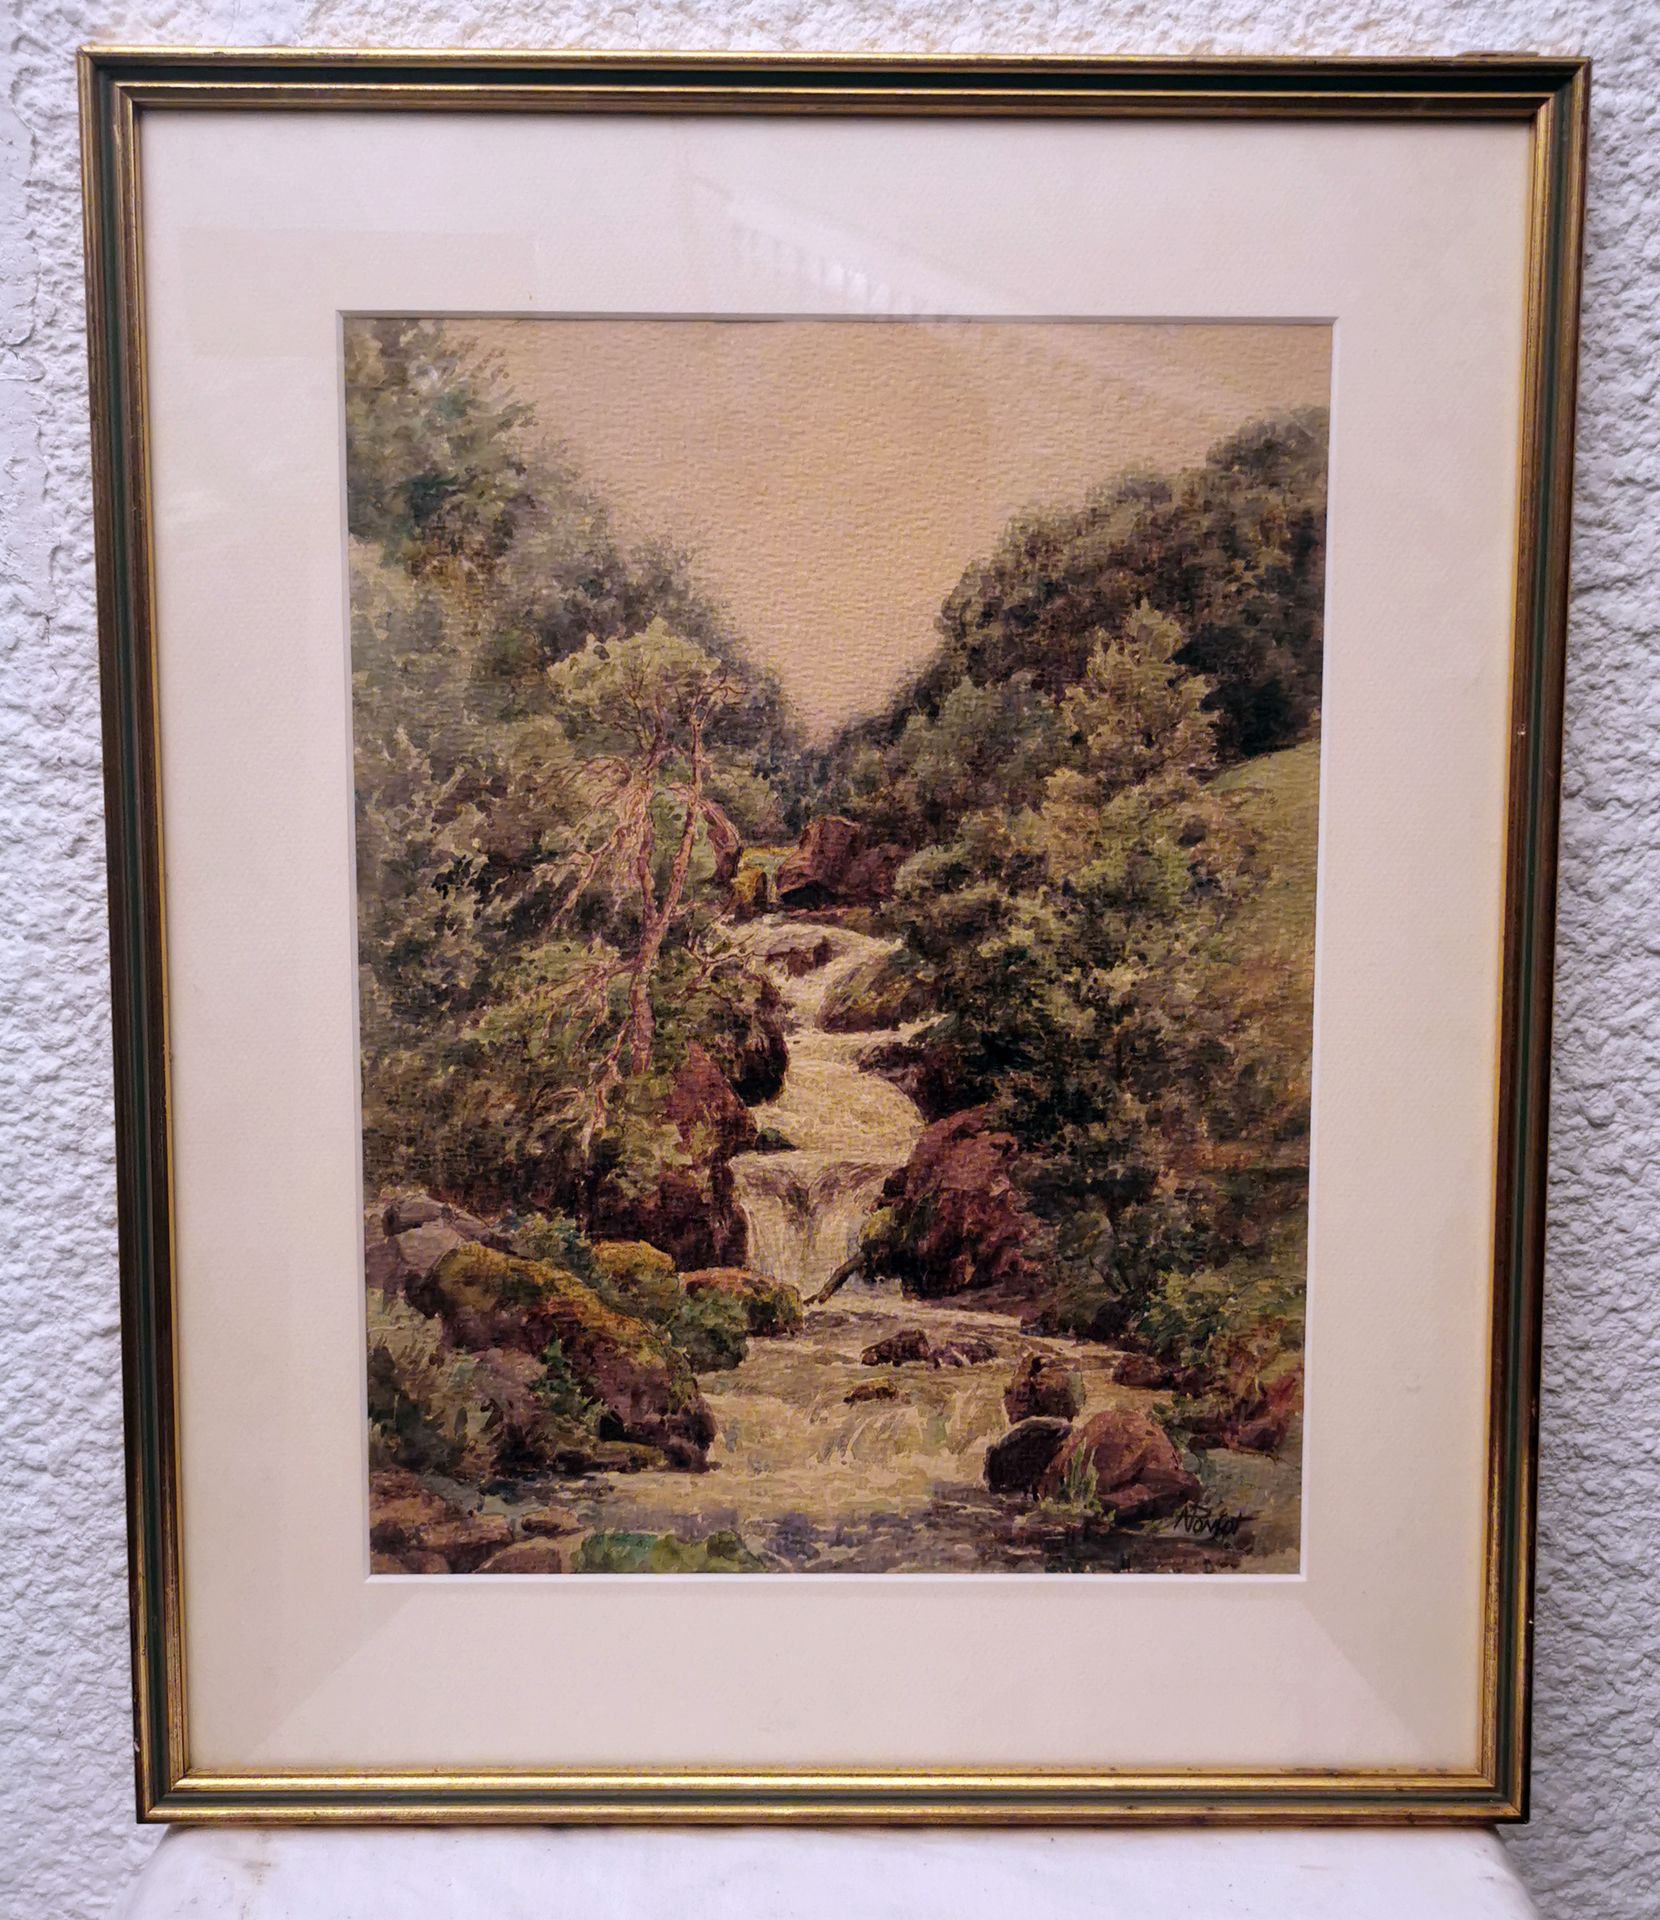 N PONSOT N.PONSOT SBD " LE TORRENT" AQUARELLE ON CANSON WITHOUT FRAME 27,5X35, W&hellip;